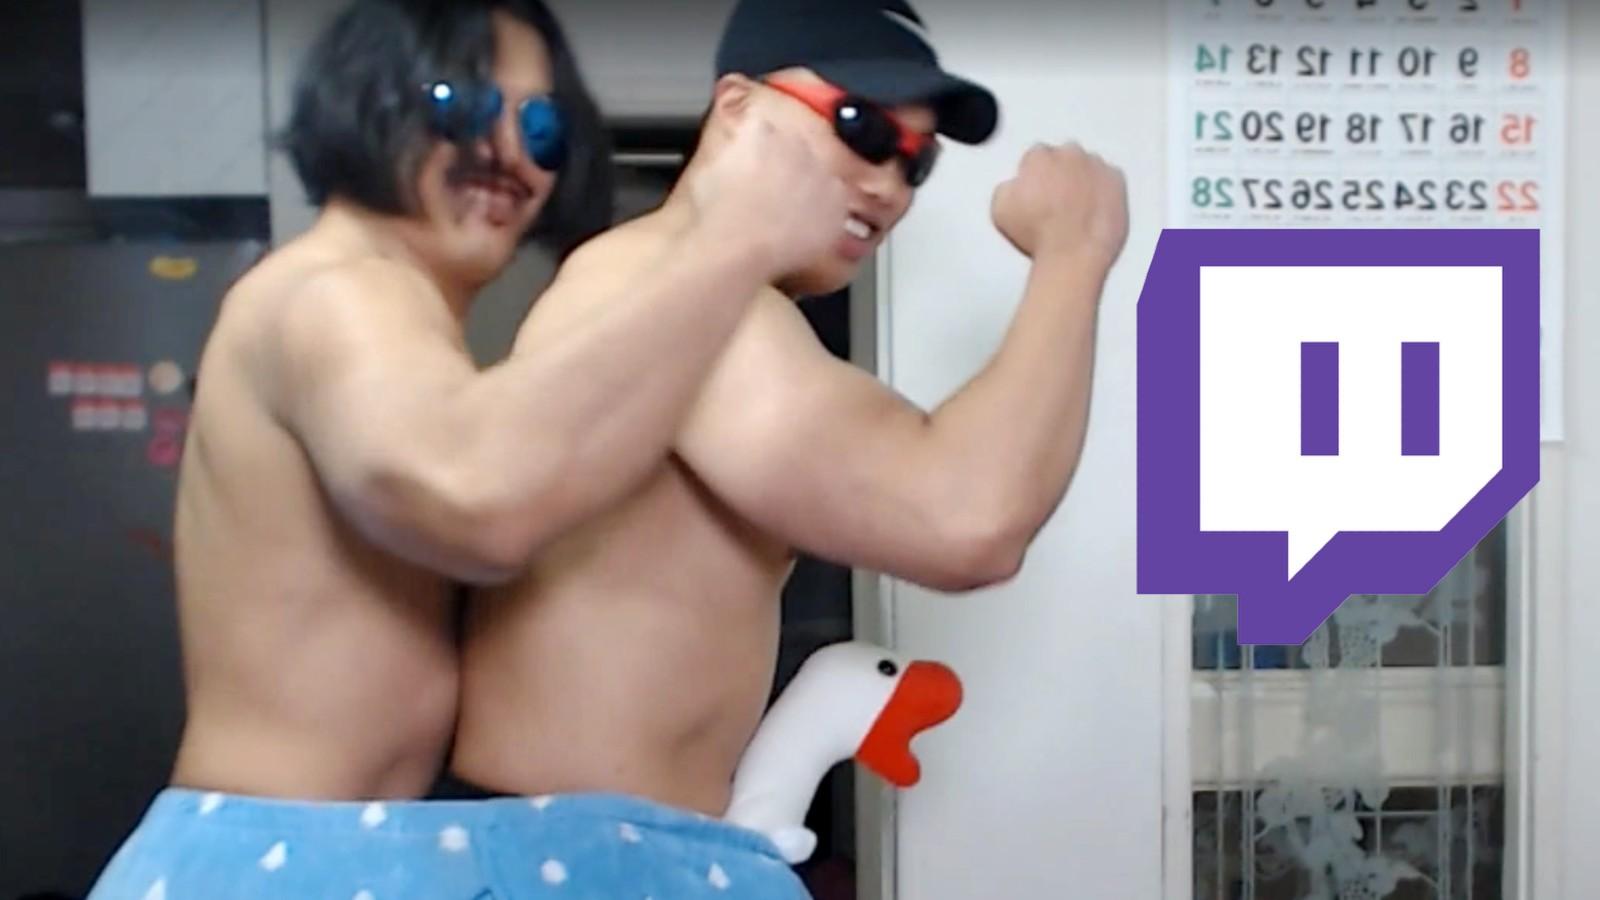 Twitch streamers dance together with a stuffed goose, alongside the Twitch logo